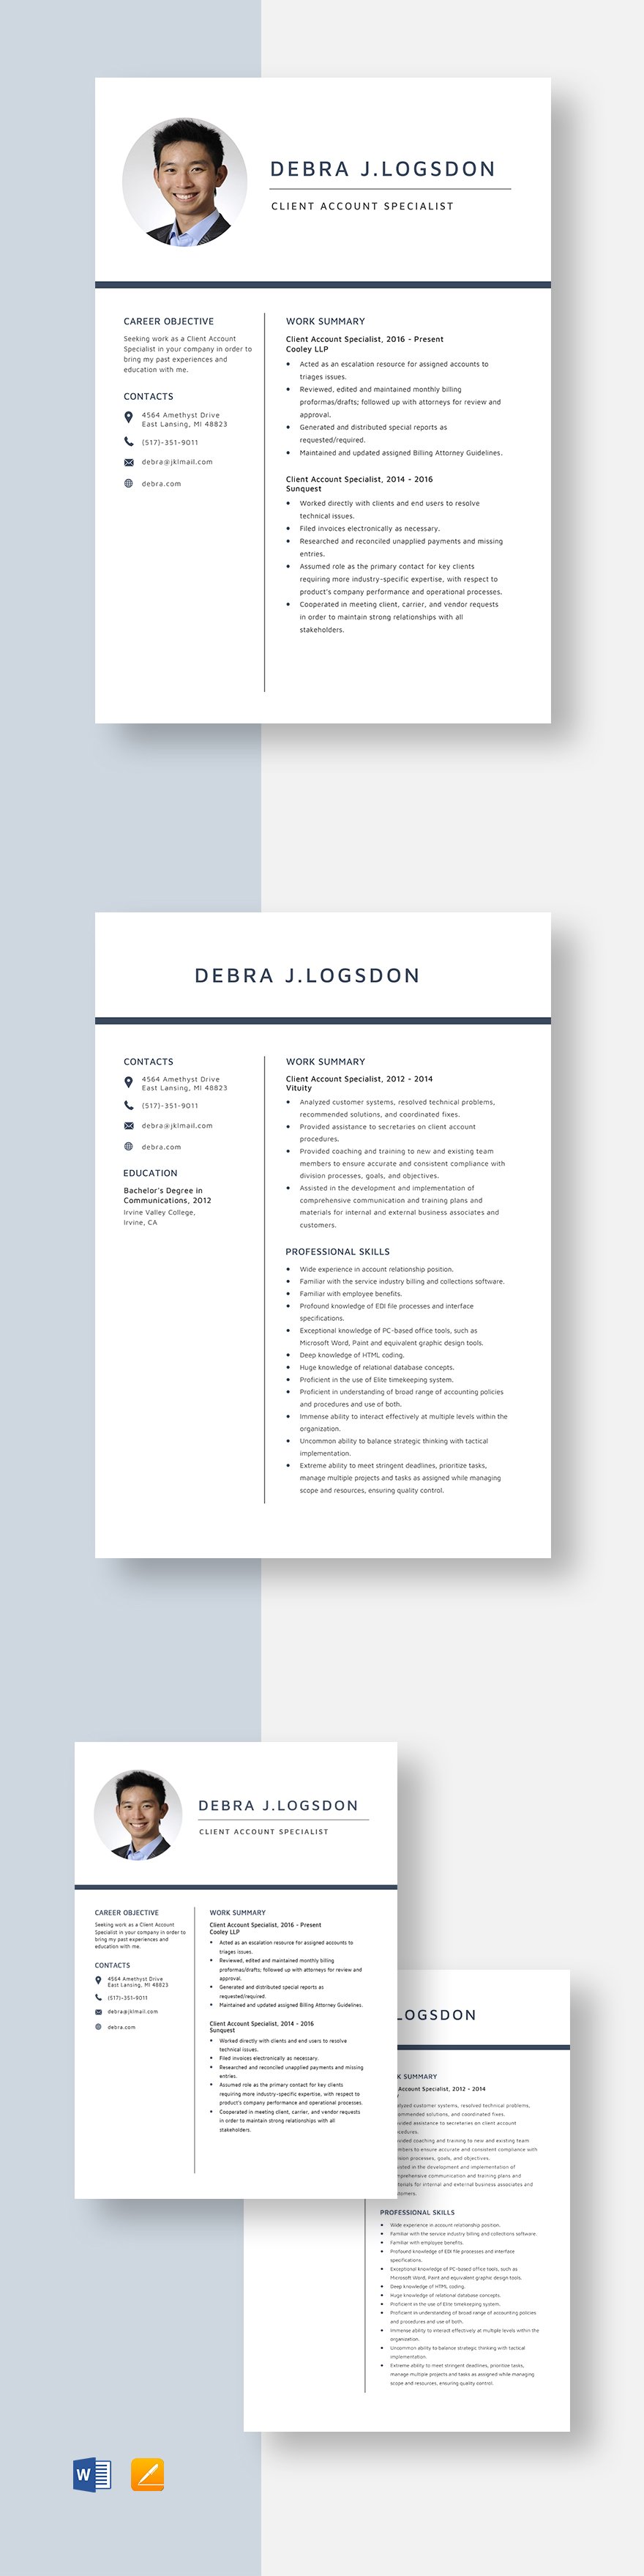 Free Client Account Specialist Resume Template